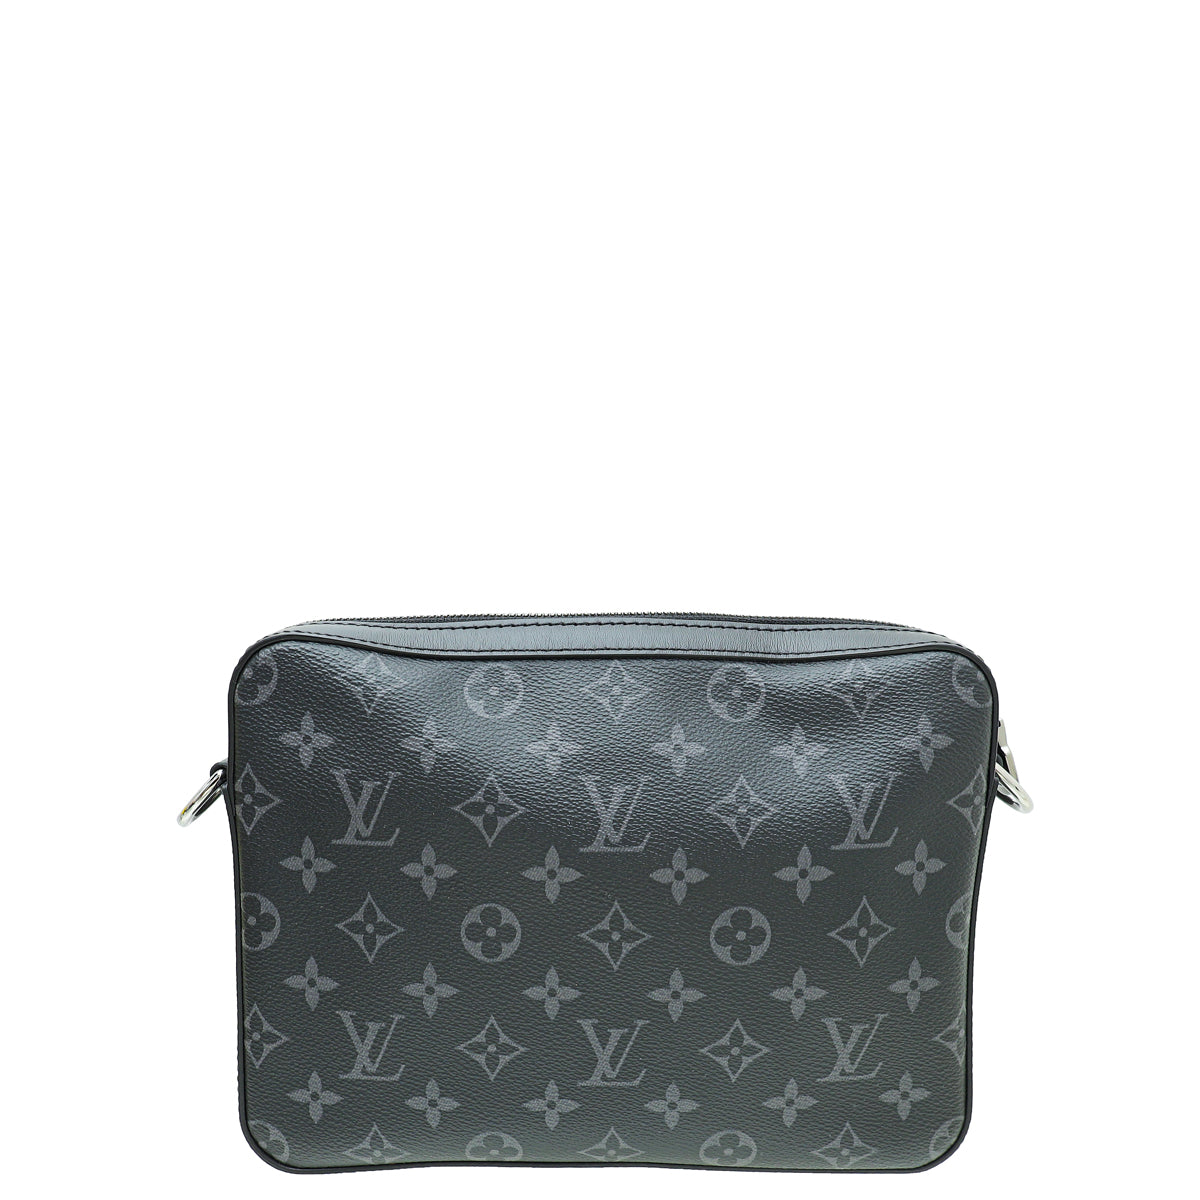 Bags, Louis Vuitton Revitalized Remake Biface Like New